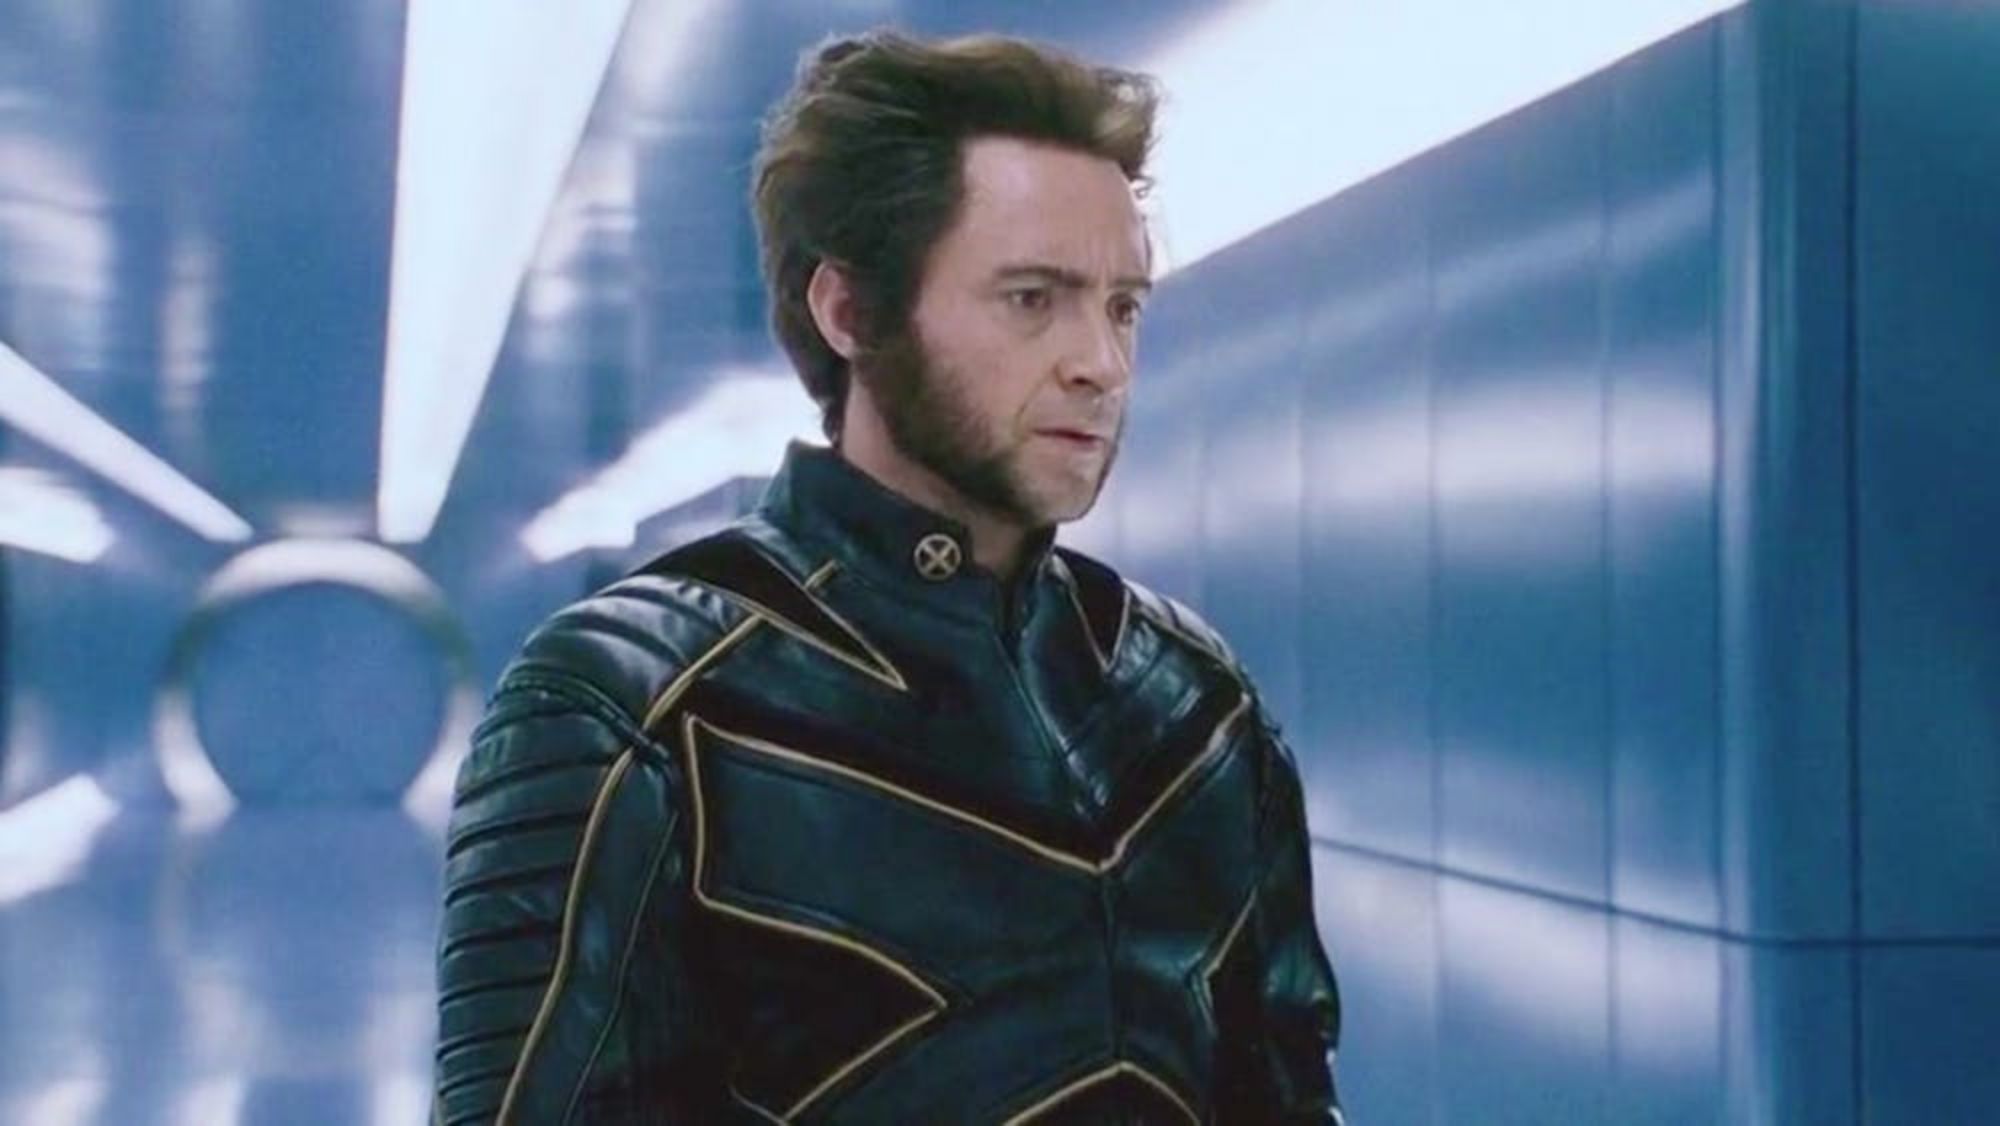 Hugh Jackman Was Nearly Fired From Being Wolverine In X-Men